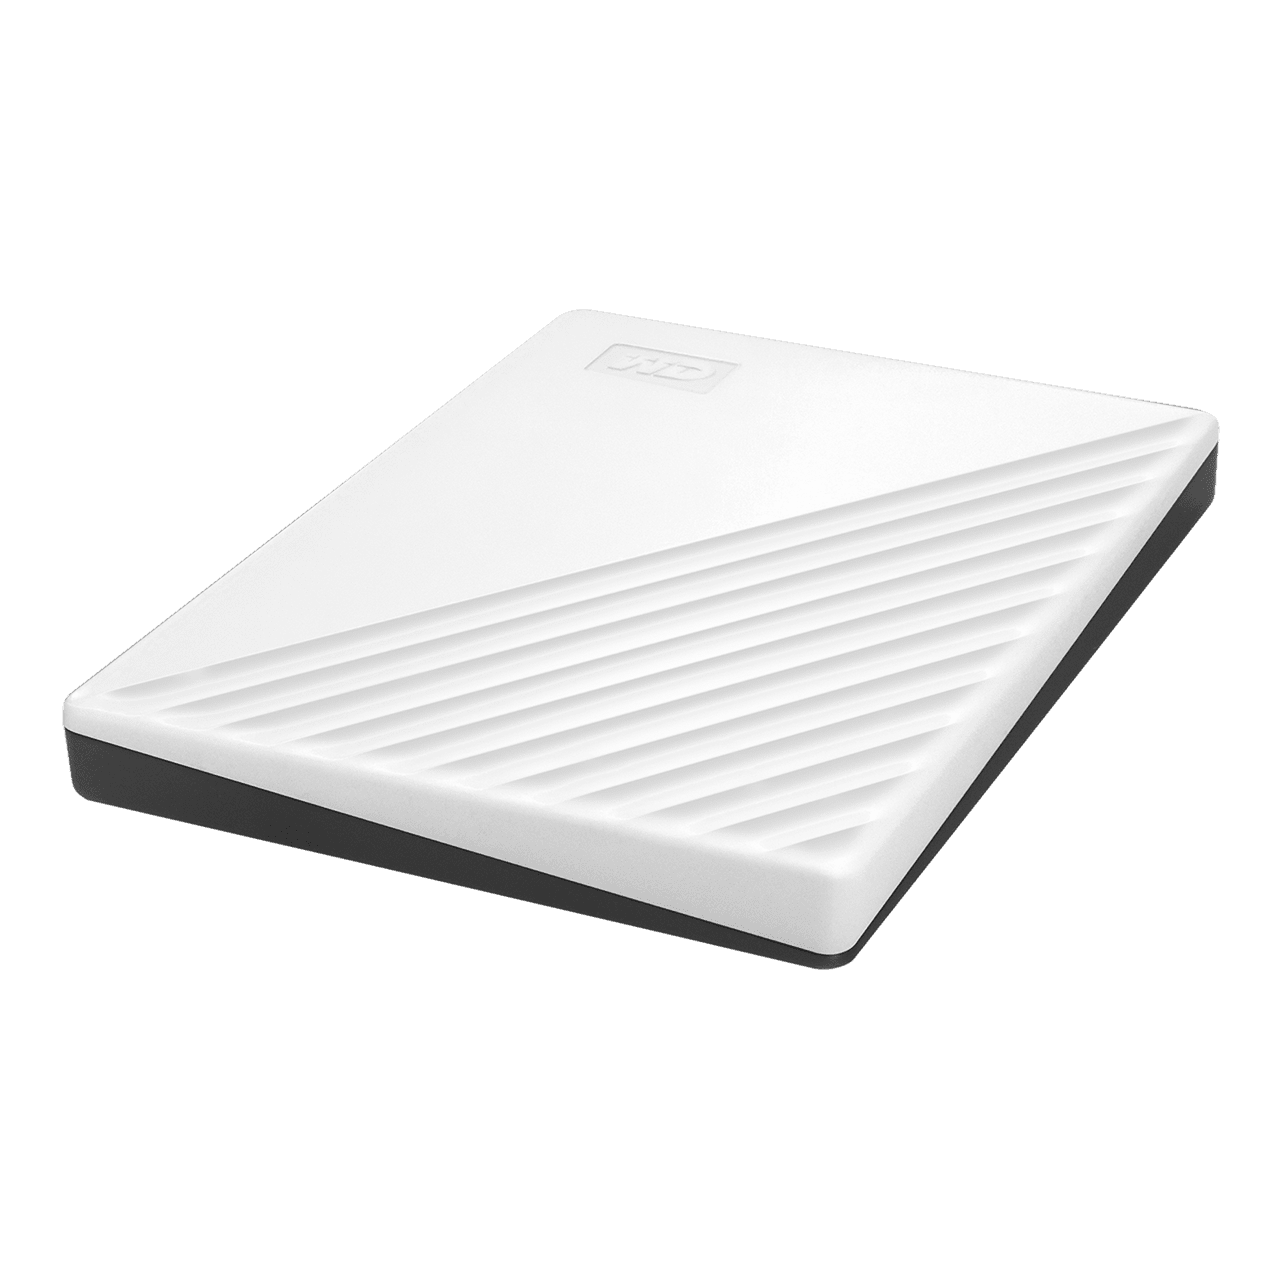 WD Western Digital My Passport 1TB Slim Portable External Hard Disk USB 3.0 With WD Backup Software & Password Protection - White